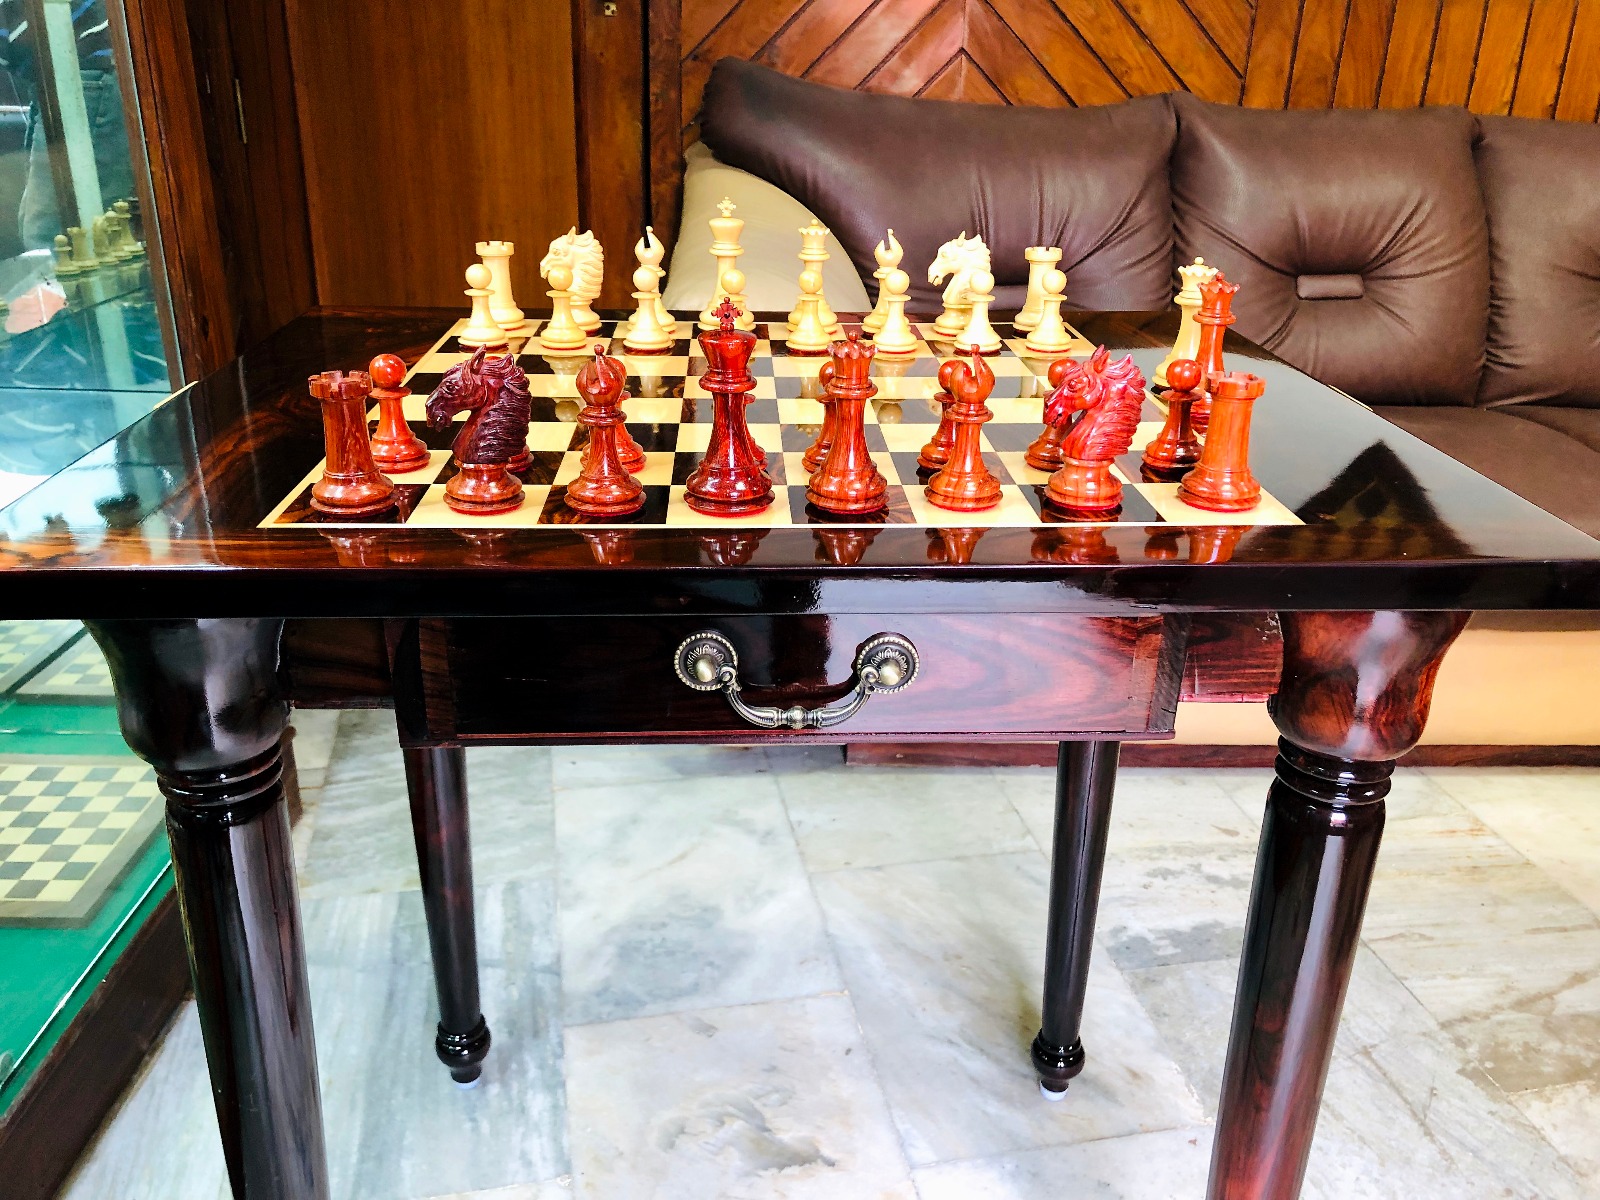 The Victoria Series Luxury Chess Table & Master Series Chess